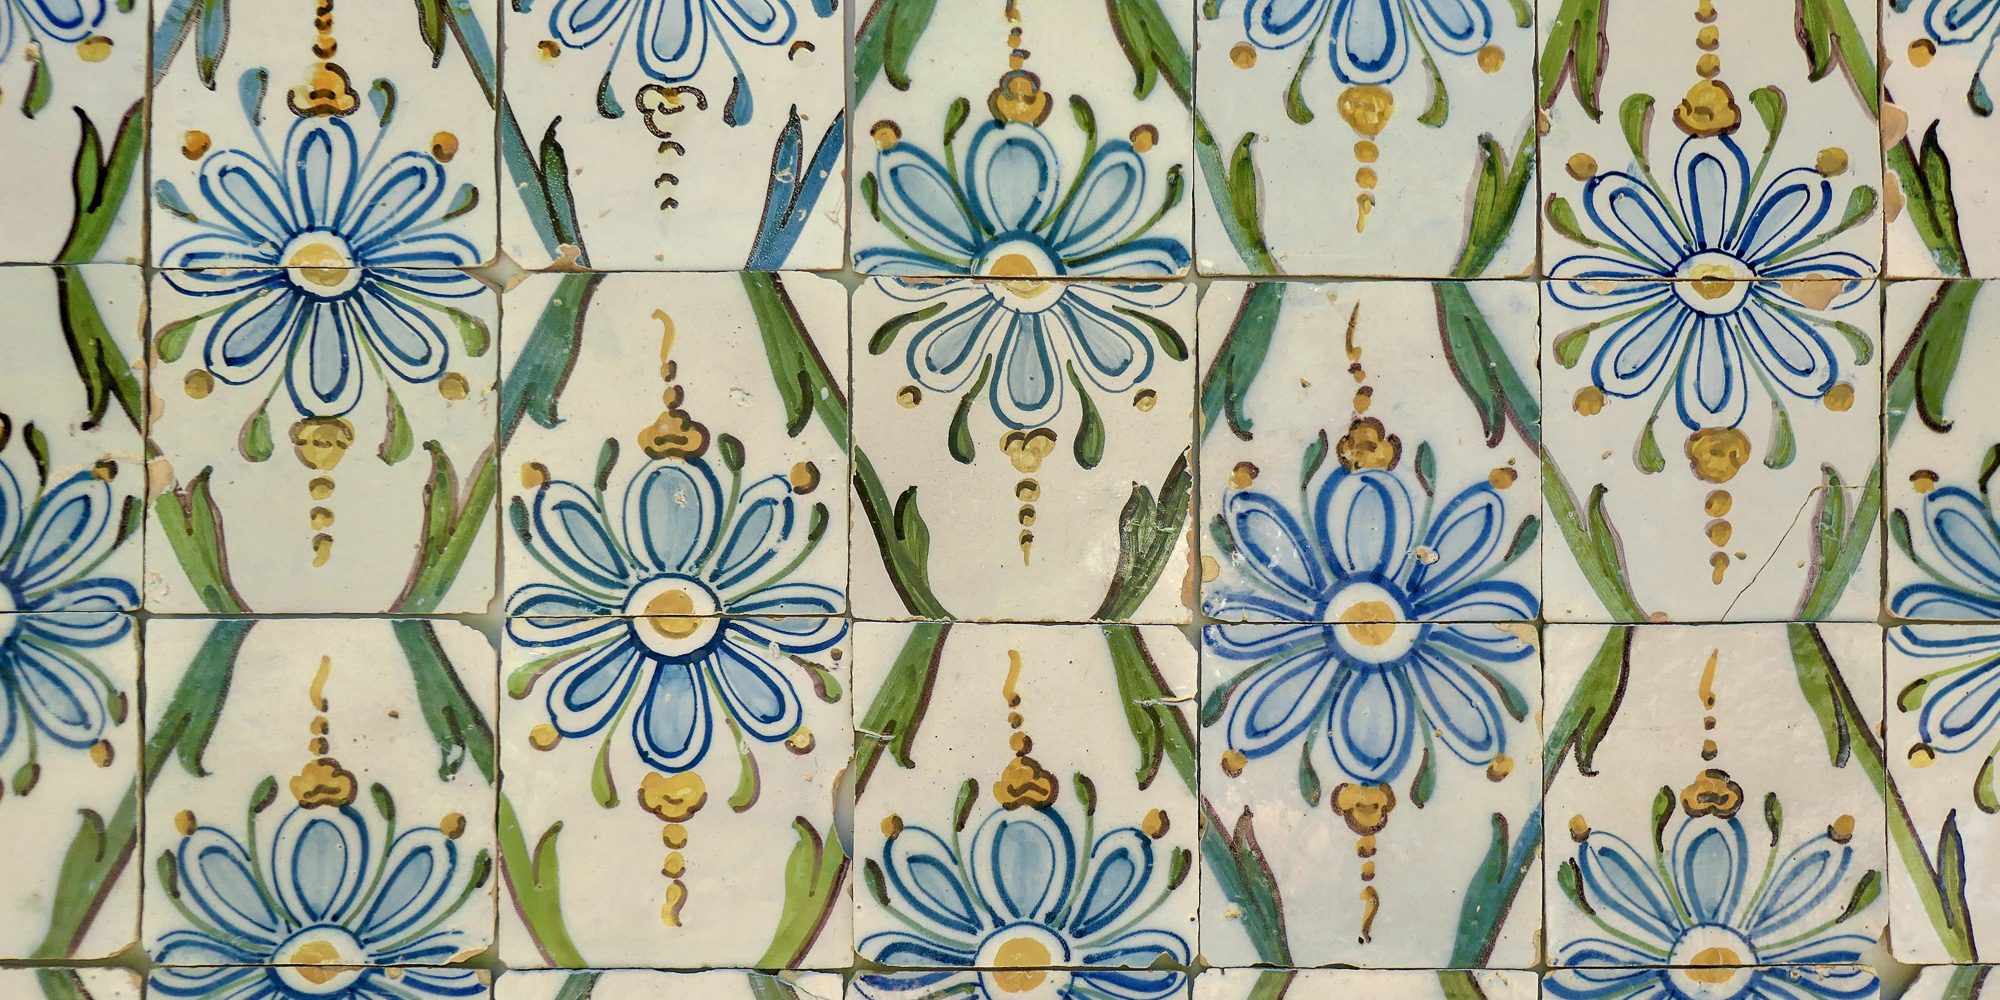 Portuguese%20tiles%20with%20a%20lovely%20blue%20floral%20motif.jpg